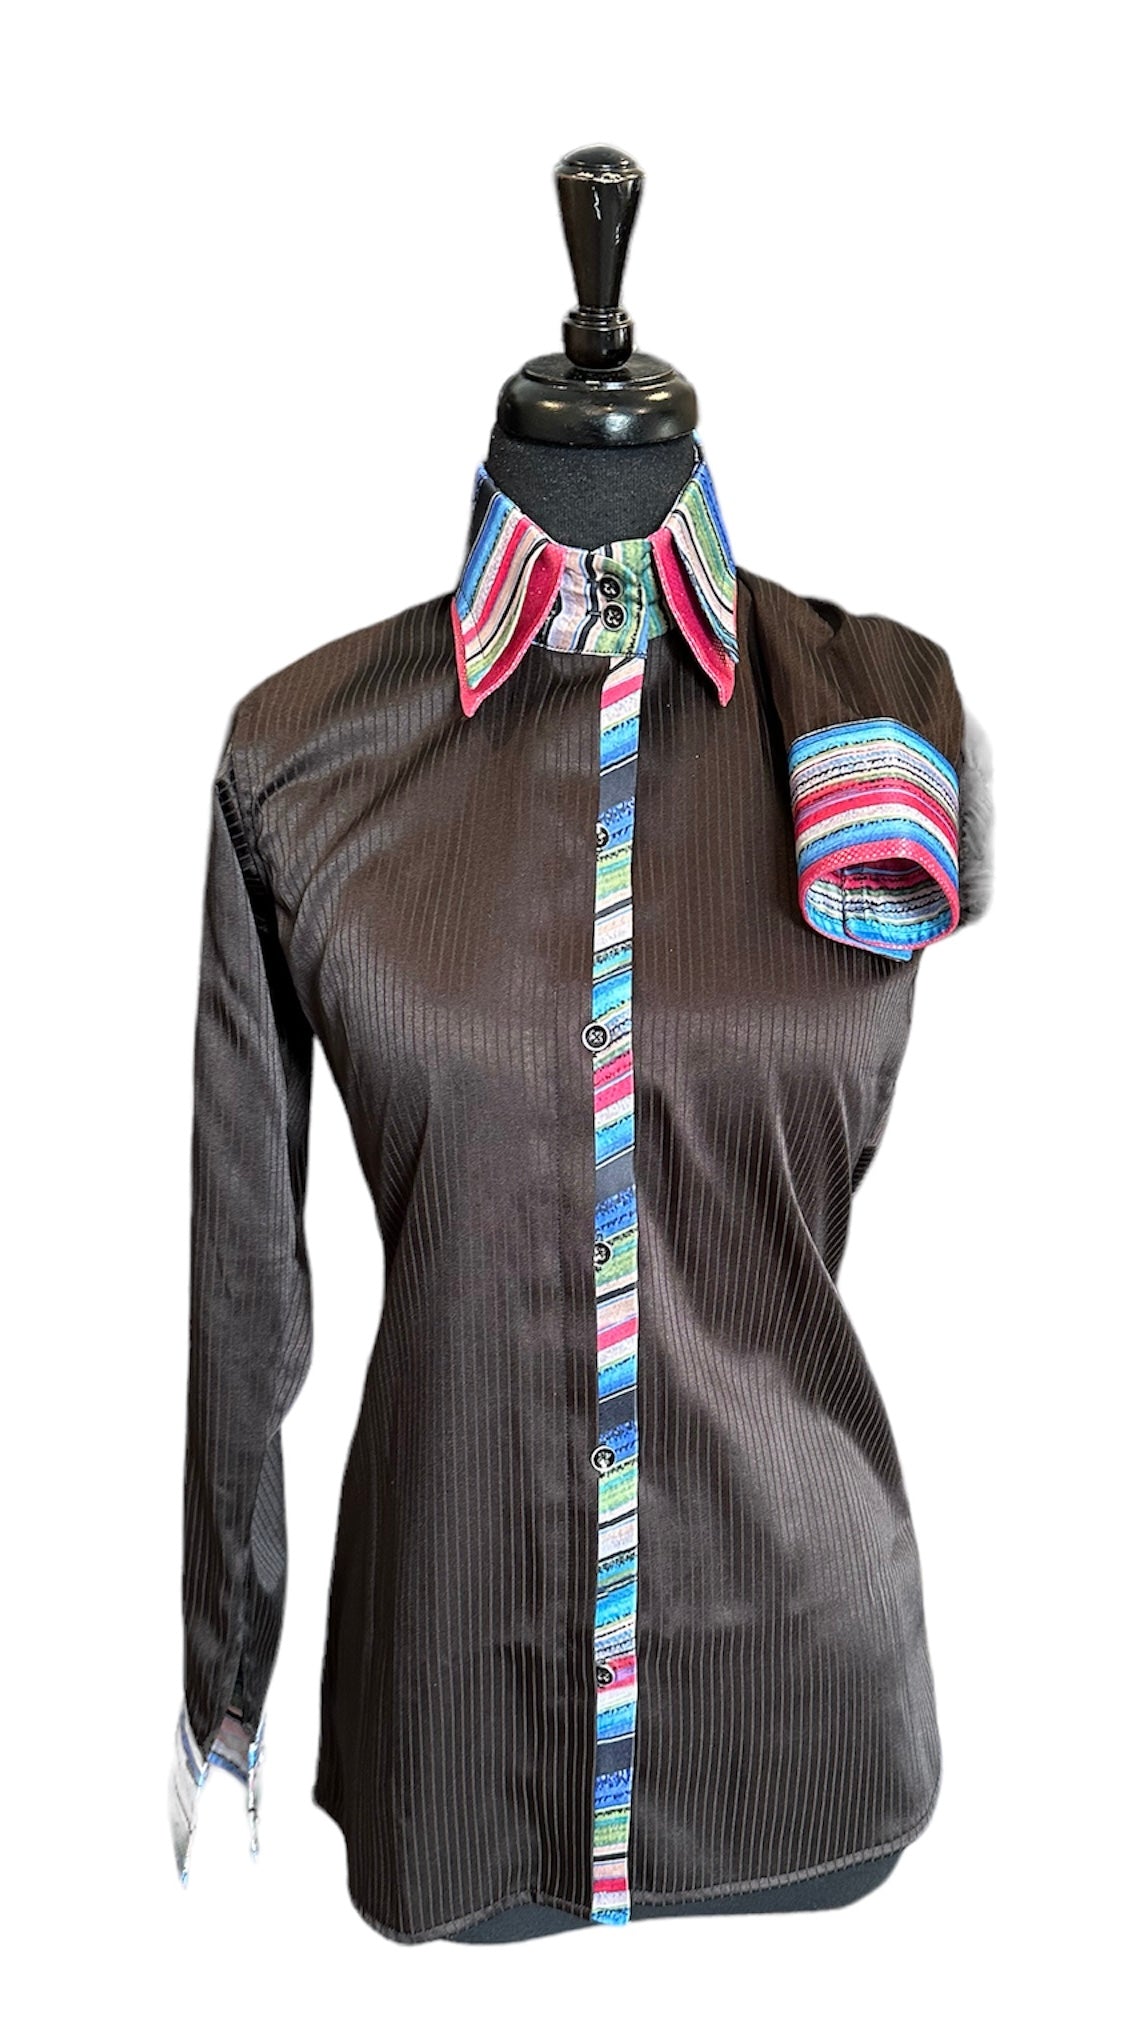 Western button Up Black tonal stripe with bright accents